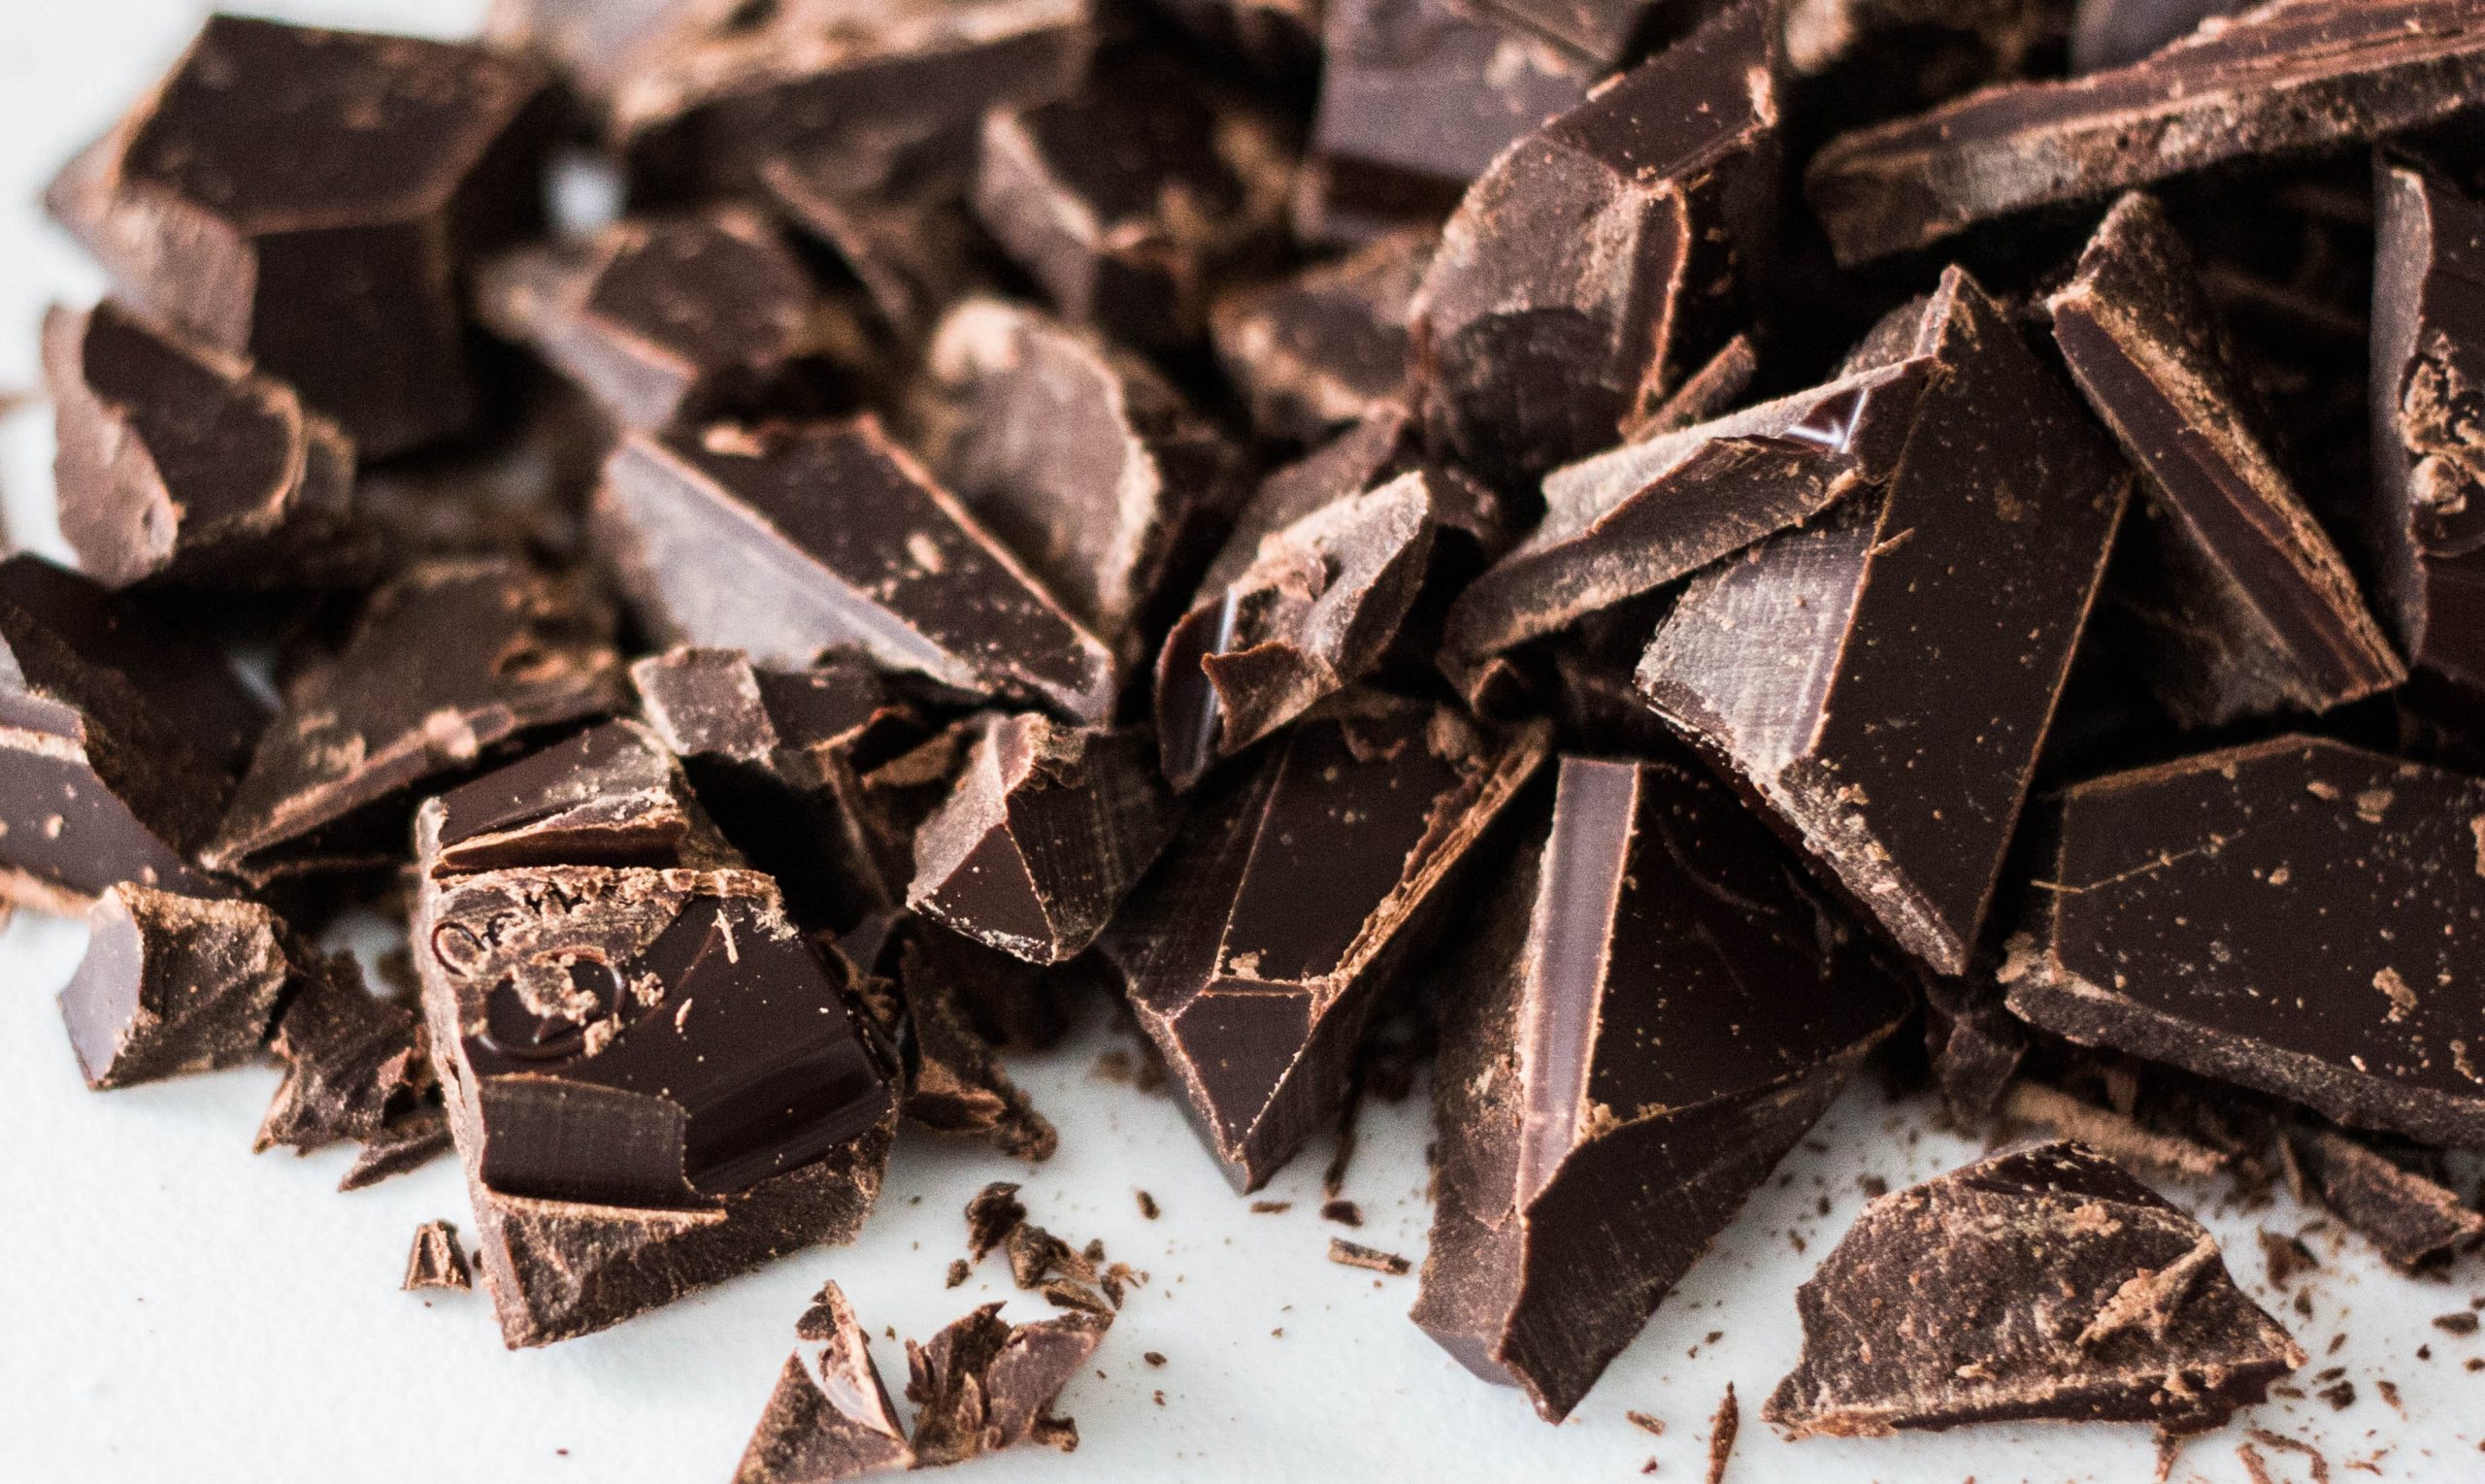 These Chocolate Recipes Will Make You Forget It’s a Monday